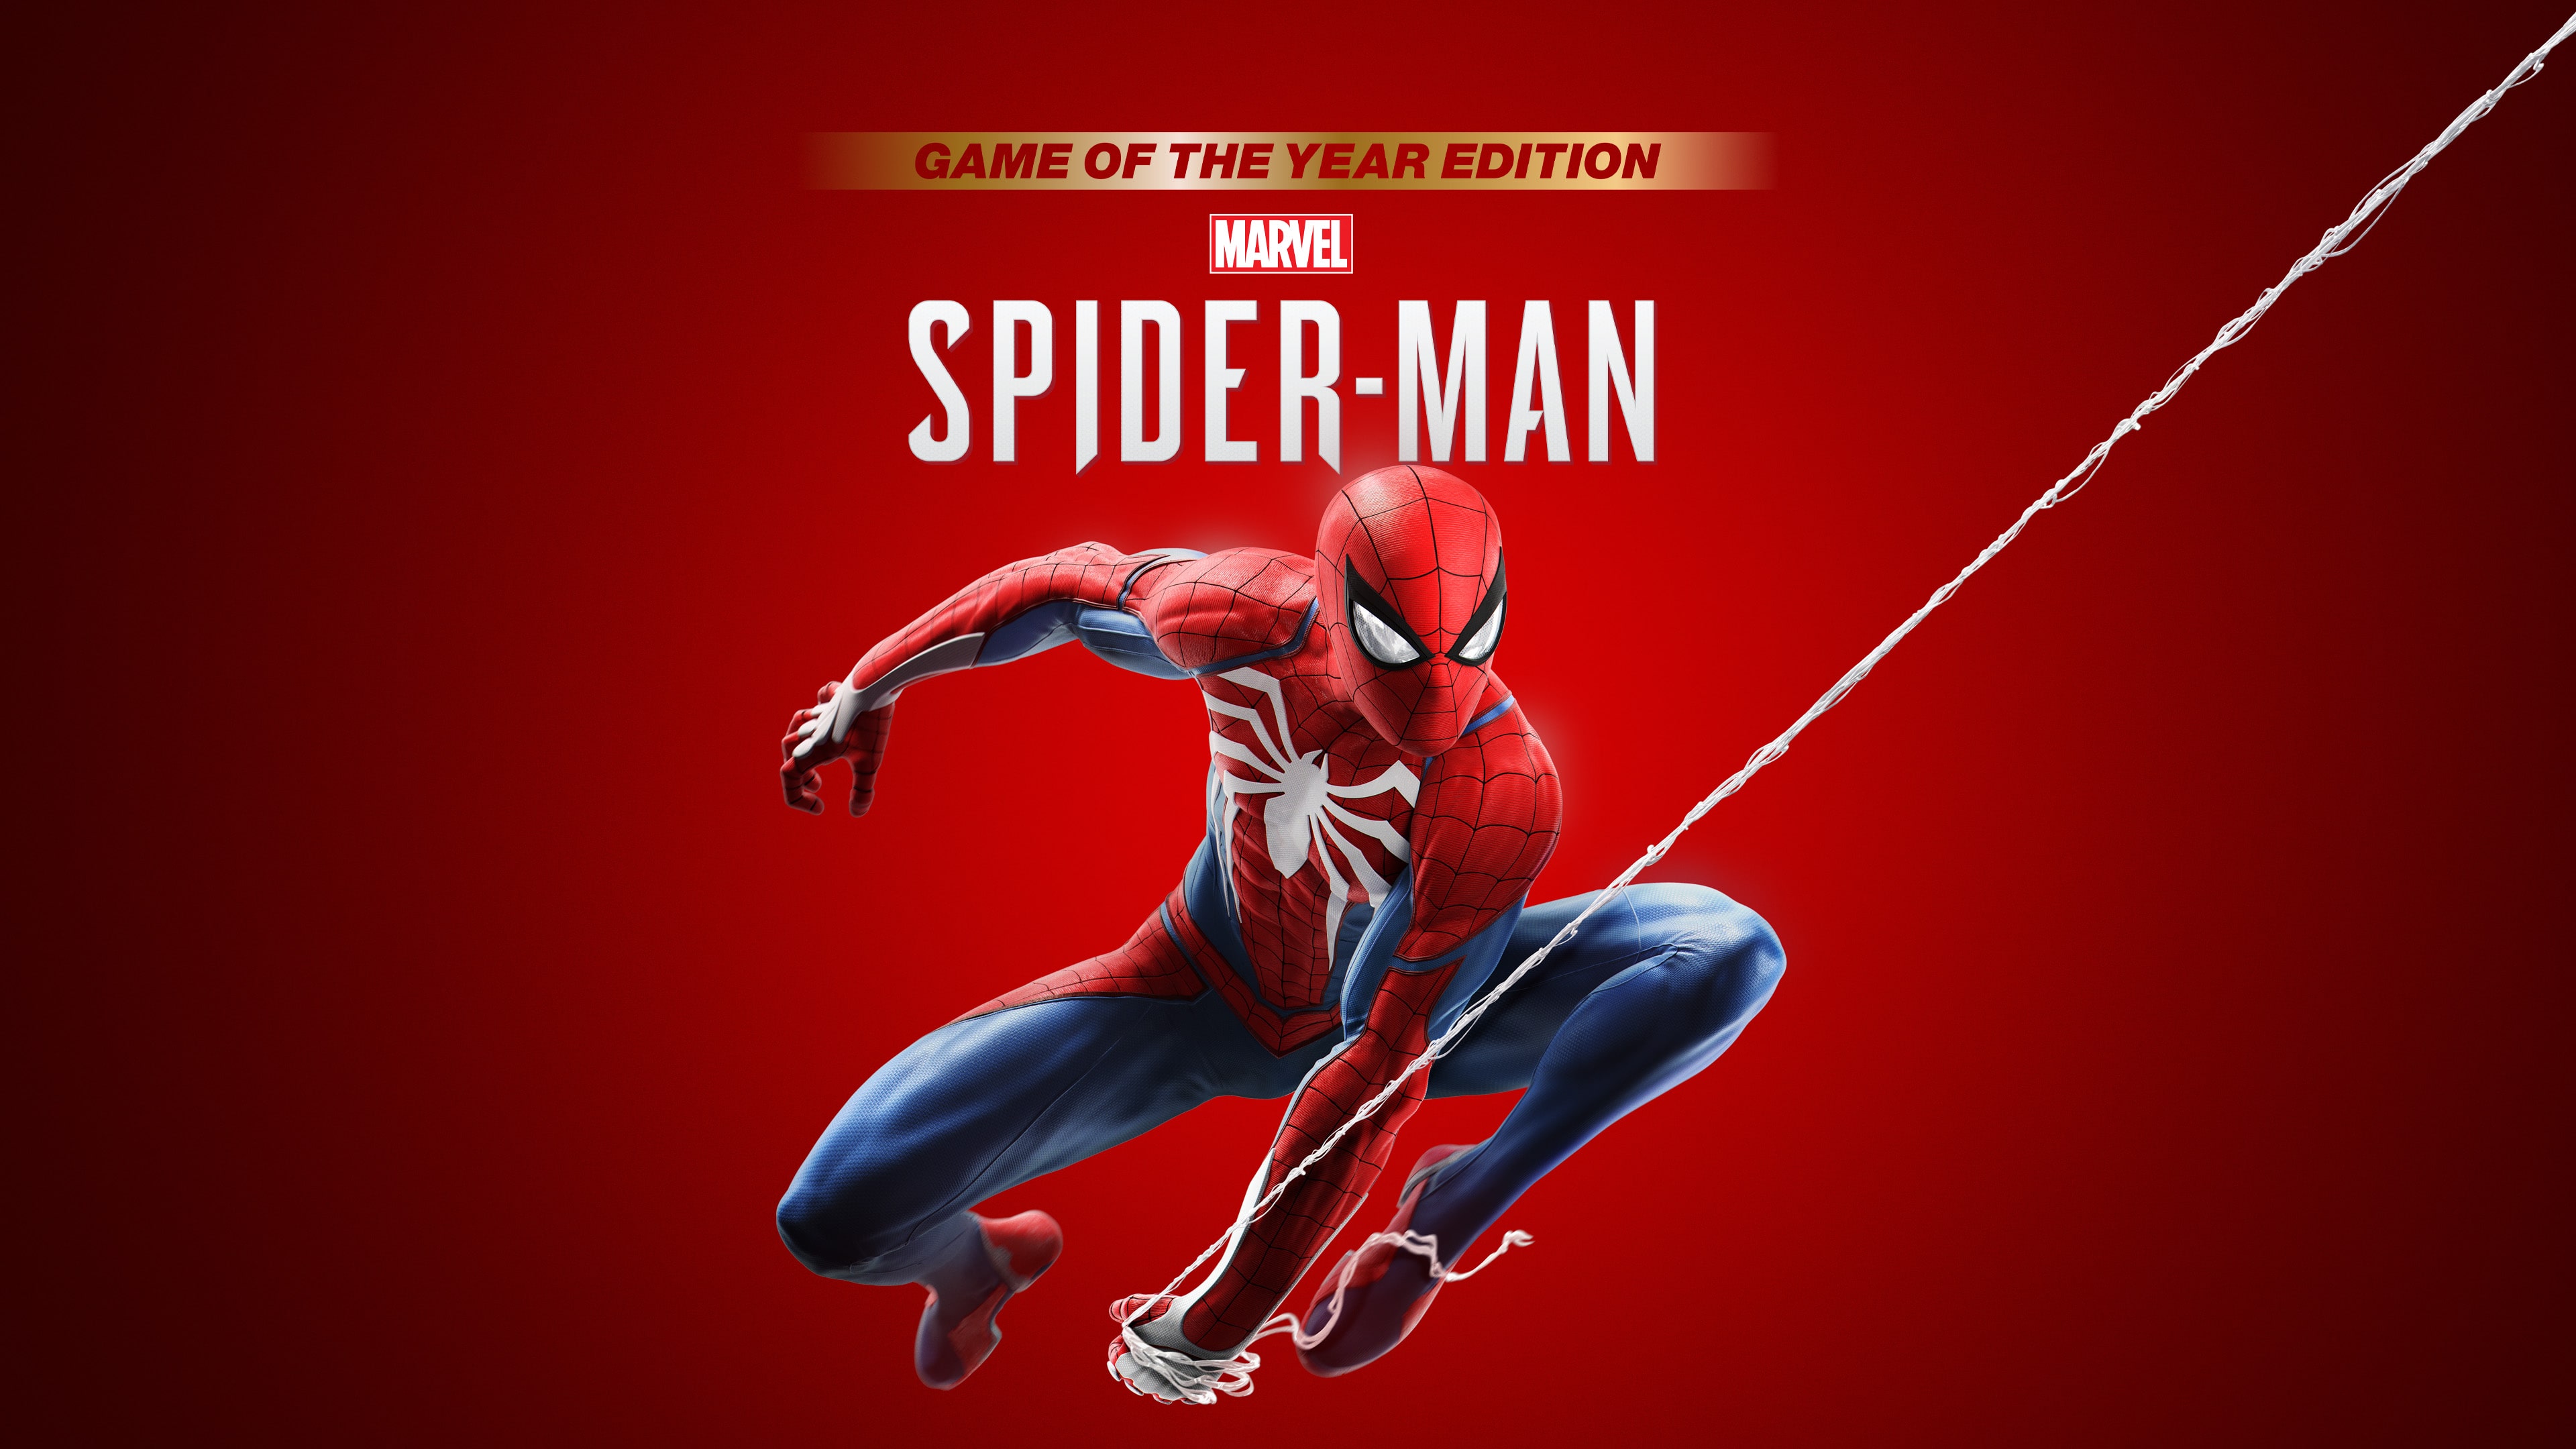 Marvel's Spider-Man Game Of The Year Edition (English, Korean, Traditional Chinese)